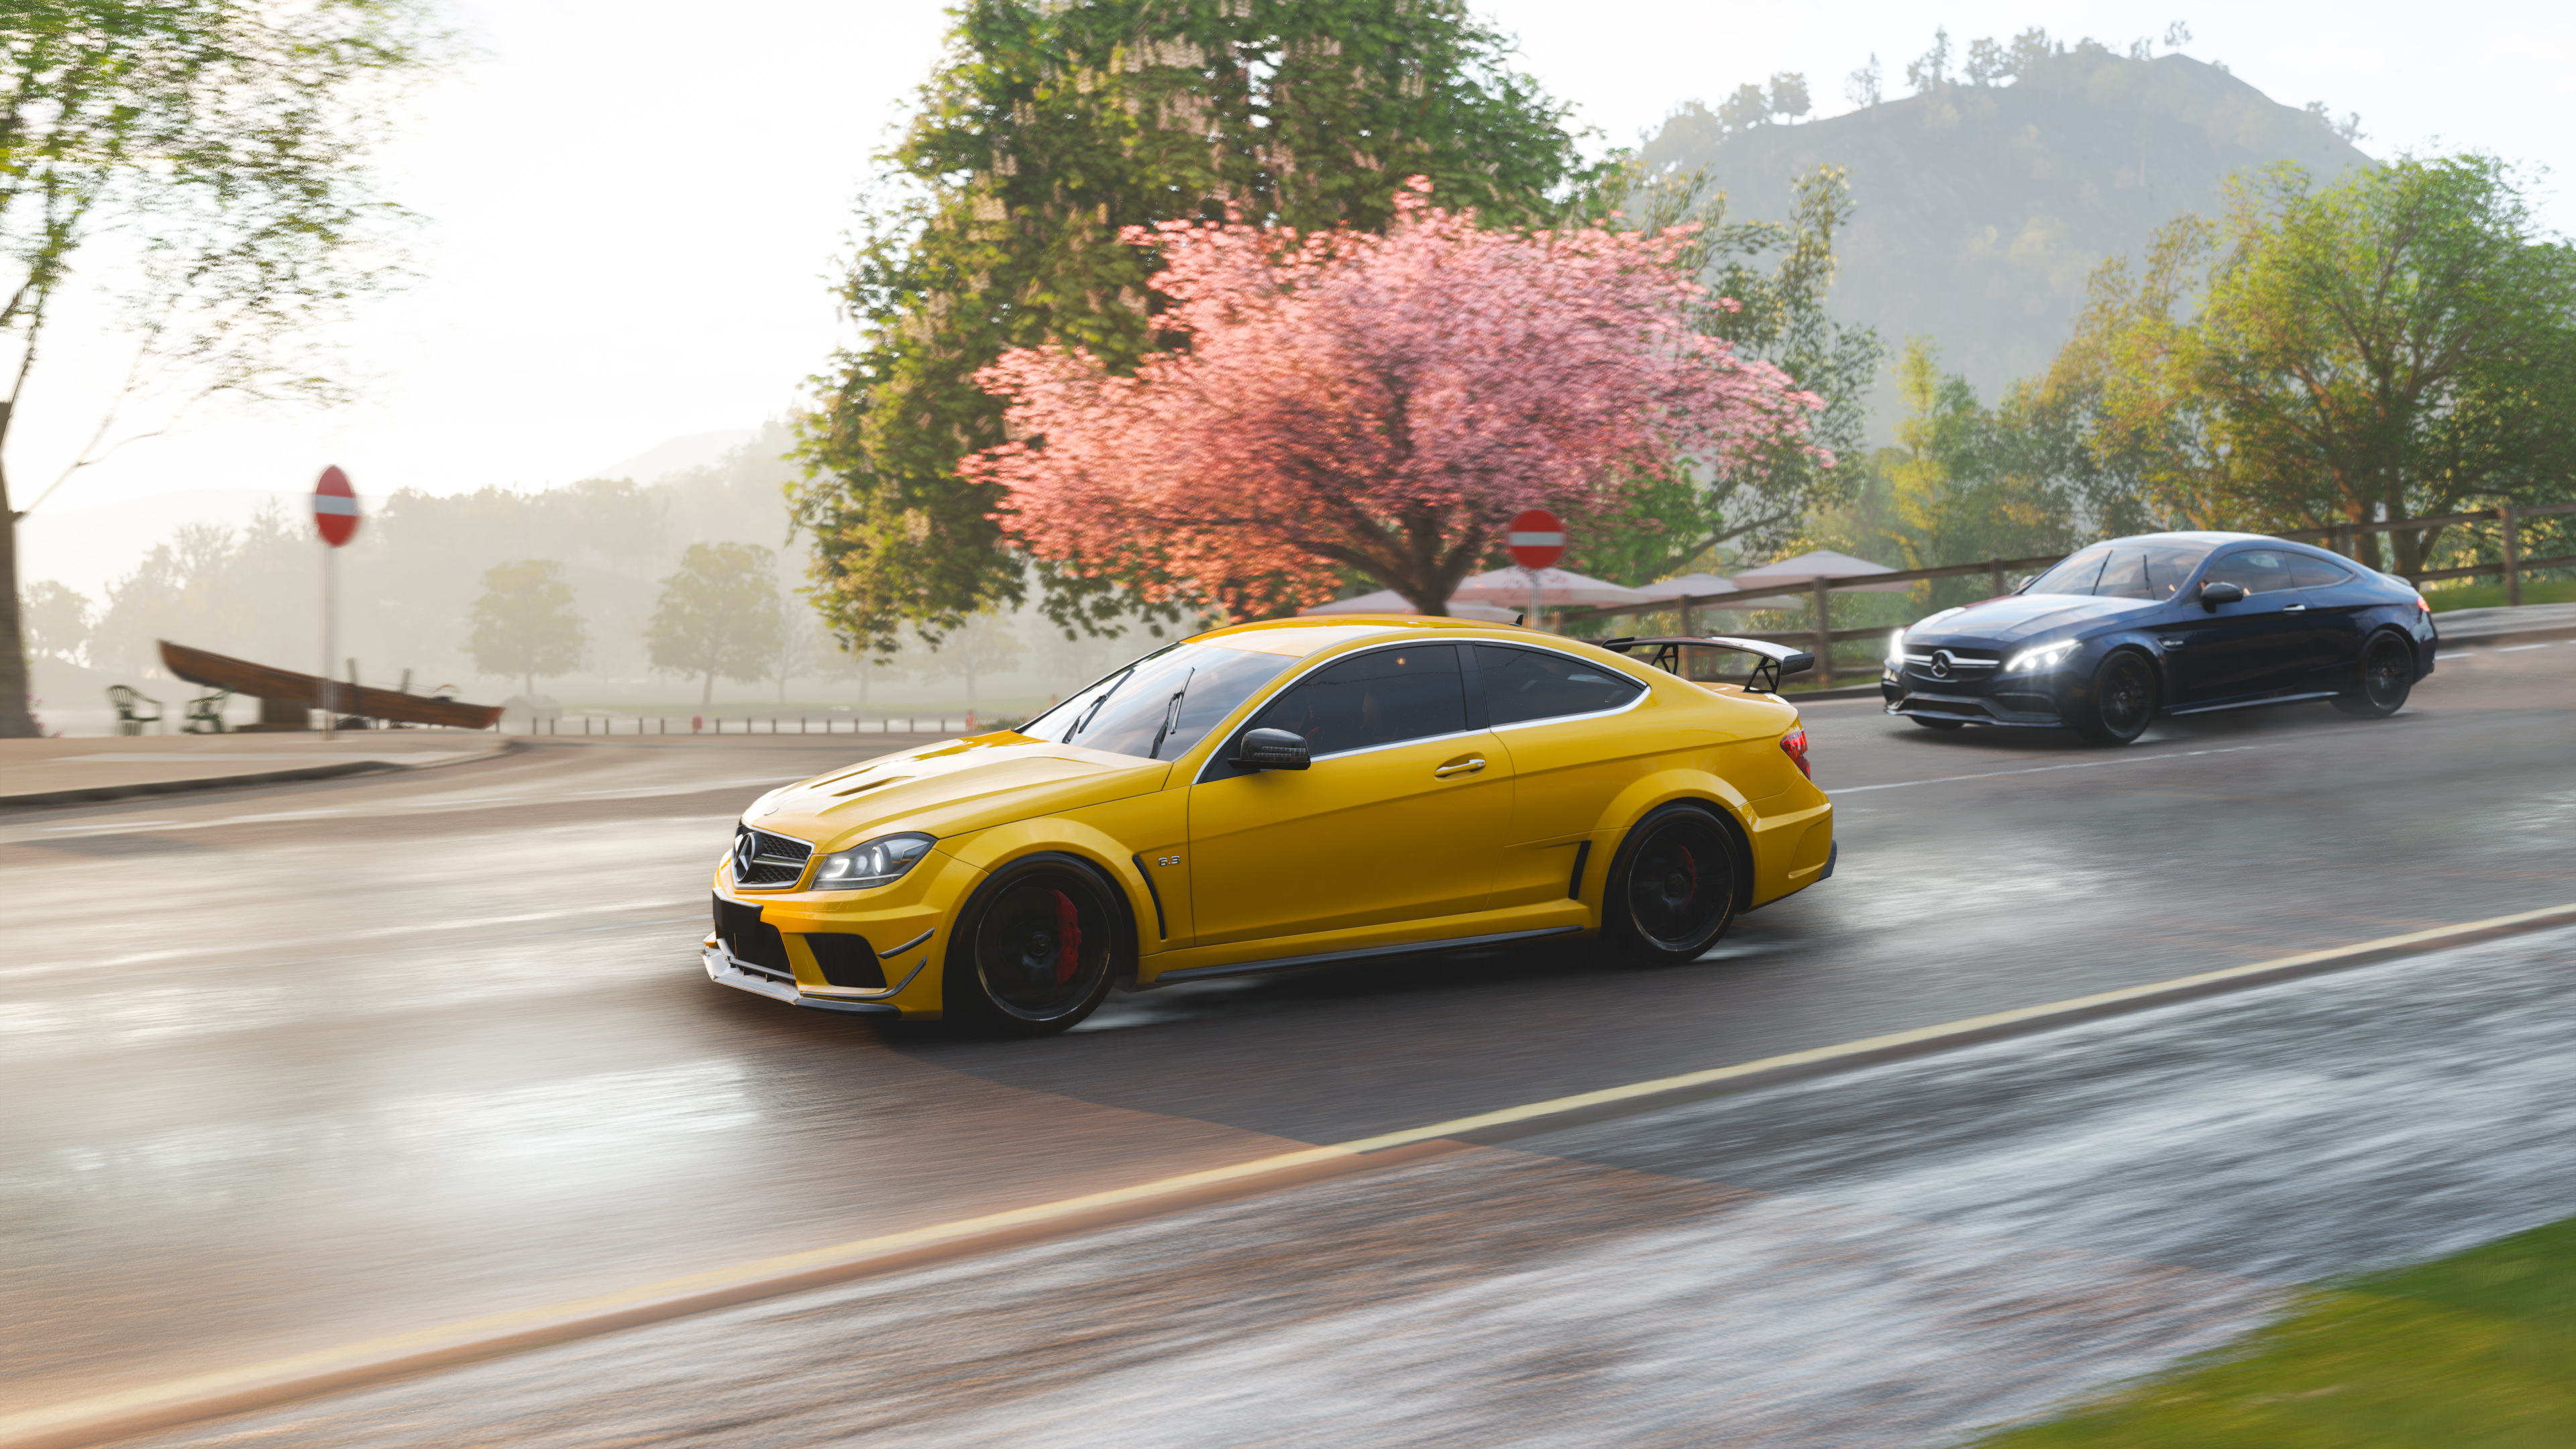 Mercedes Benz C63 AMG Coupe In Forza Horizon 4 4k, HD